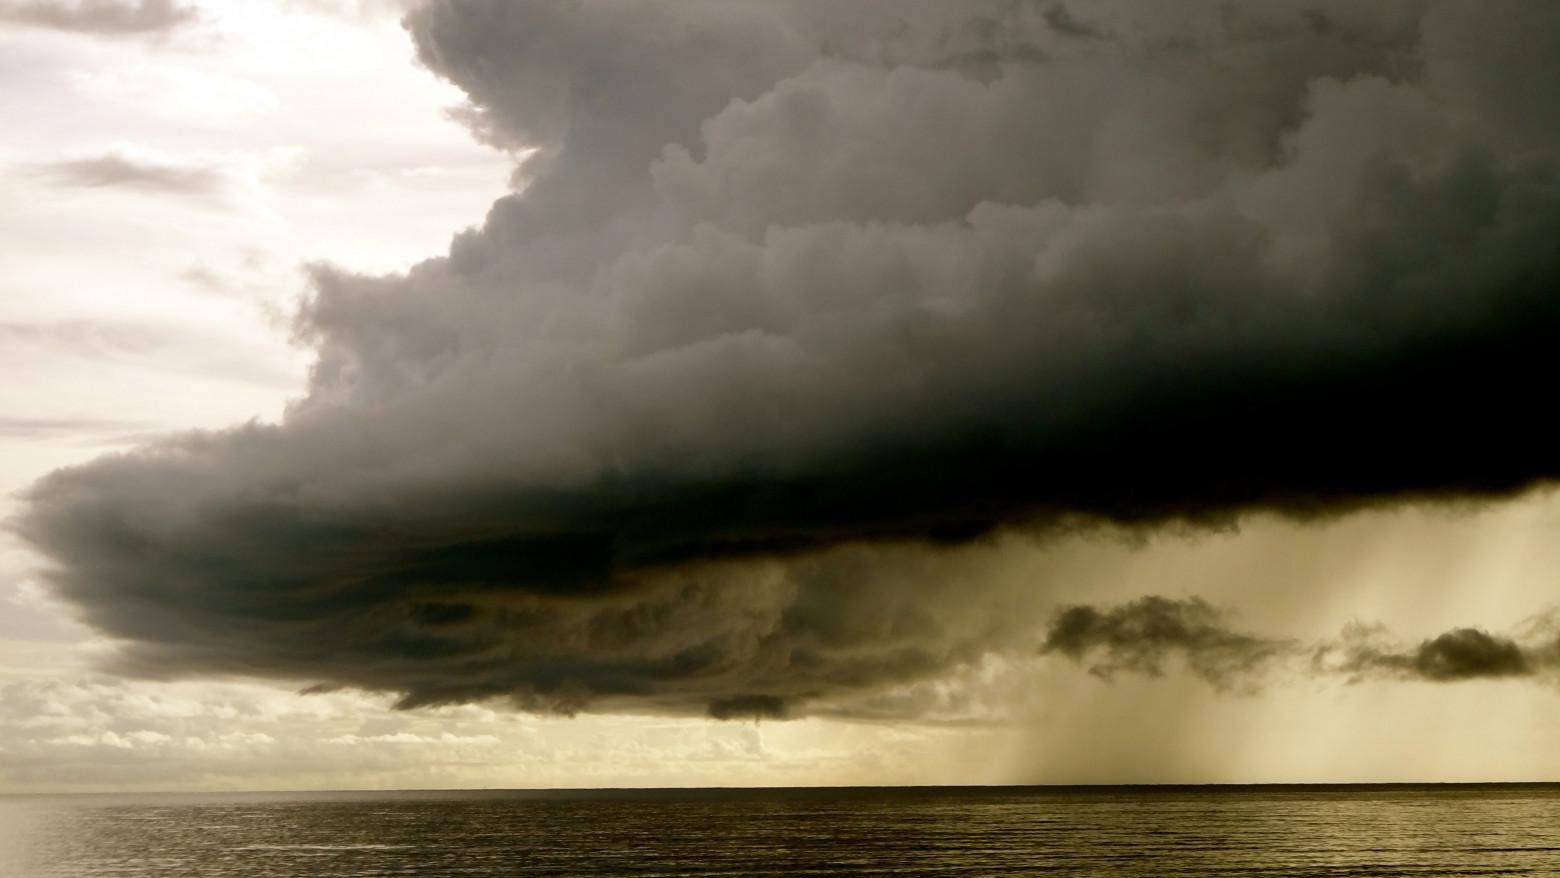 A low, gray storm cloud over a body of water.